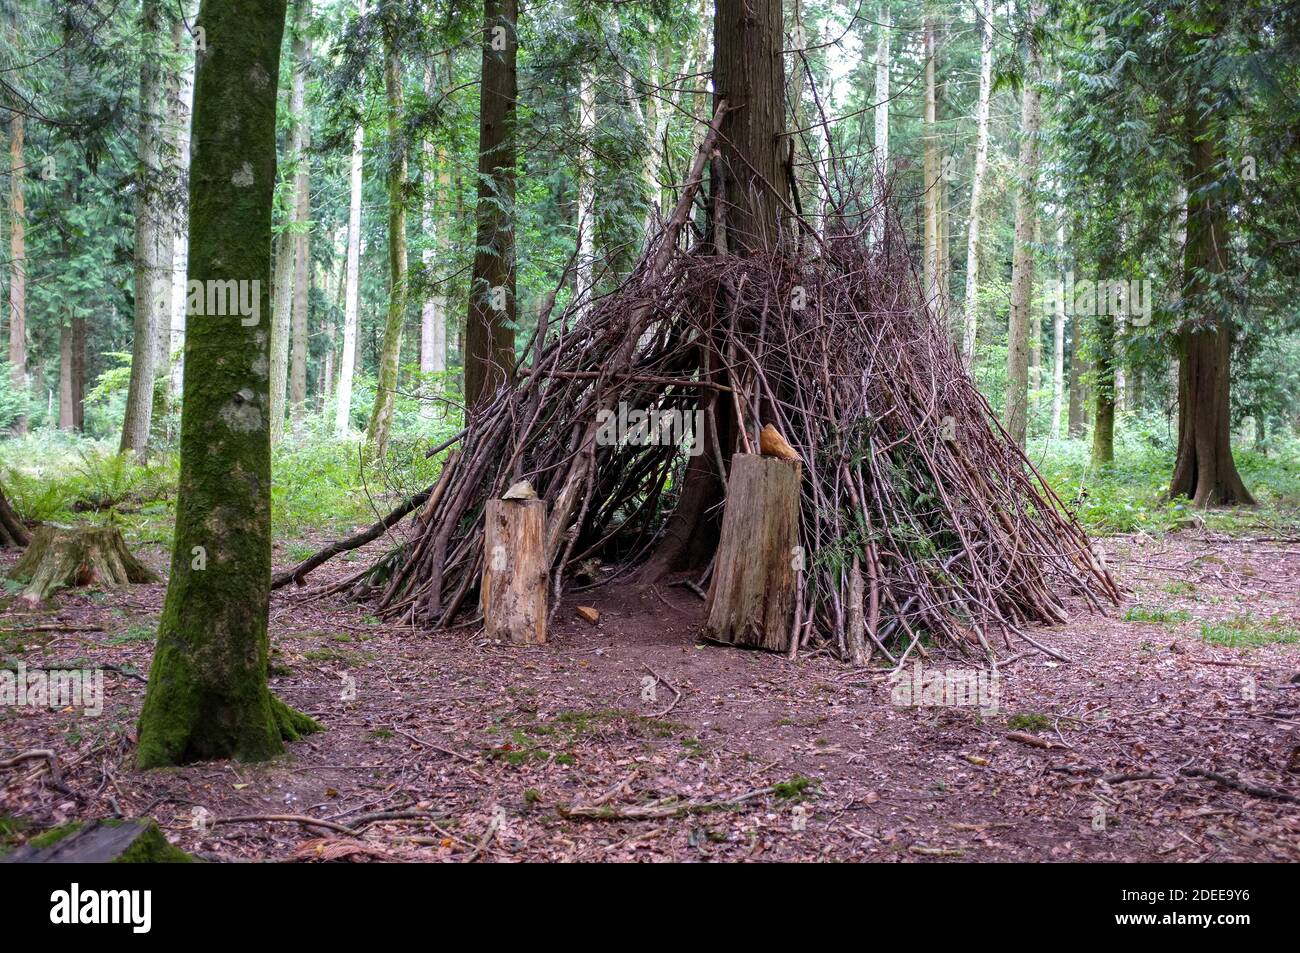 A temporary house made of tree branches in the middle of woods. Grovely Wood. Wilton UK 2018 Stock Photo